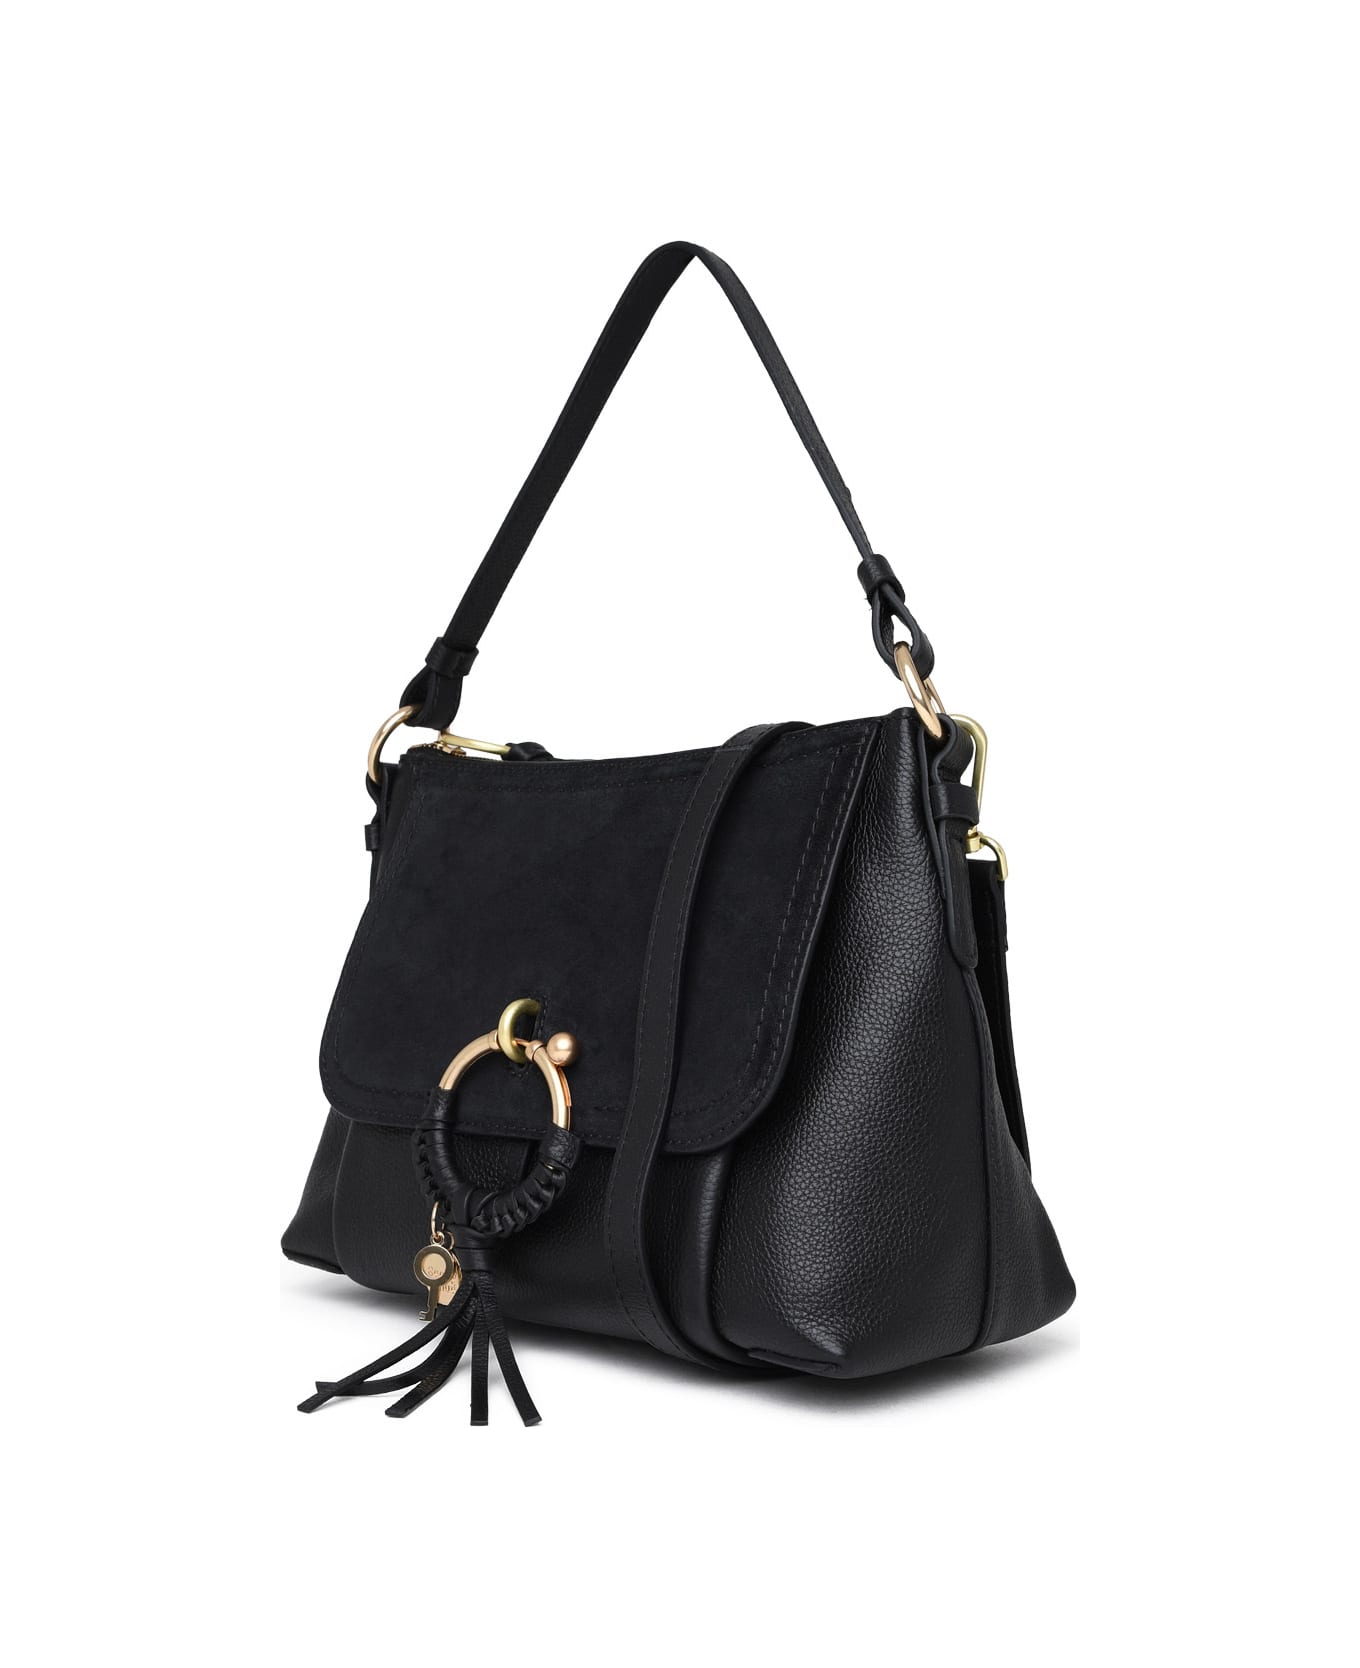 See by Chloé Black Leather Small Joan Bag - Black